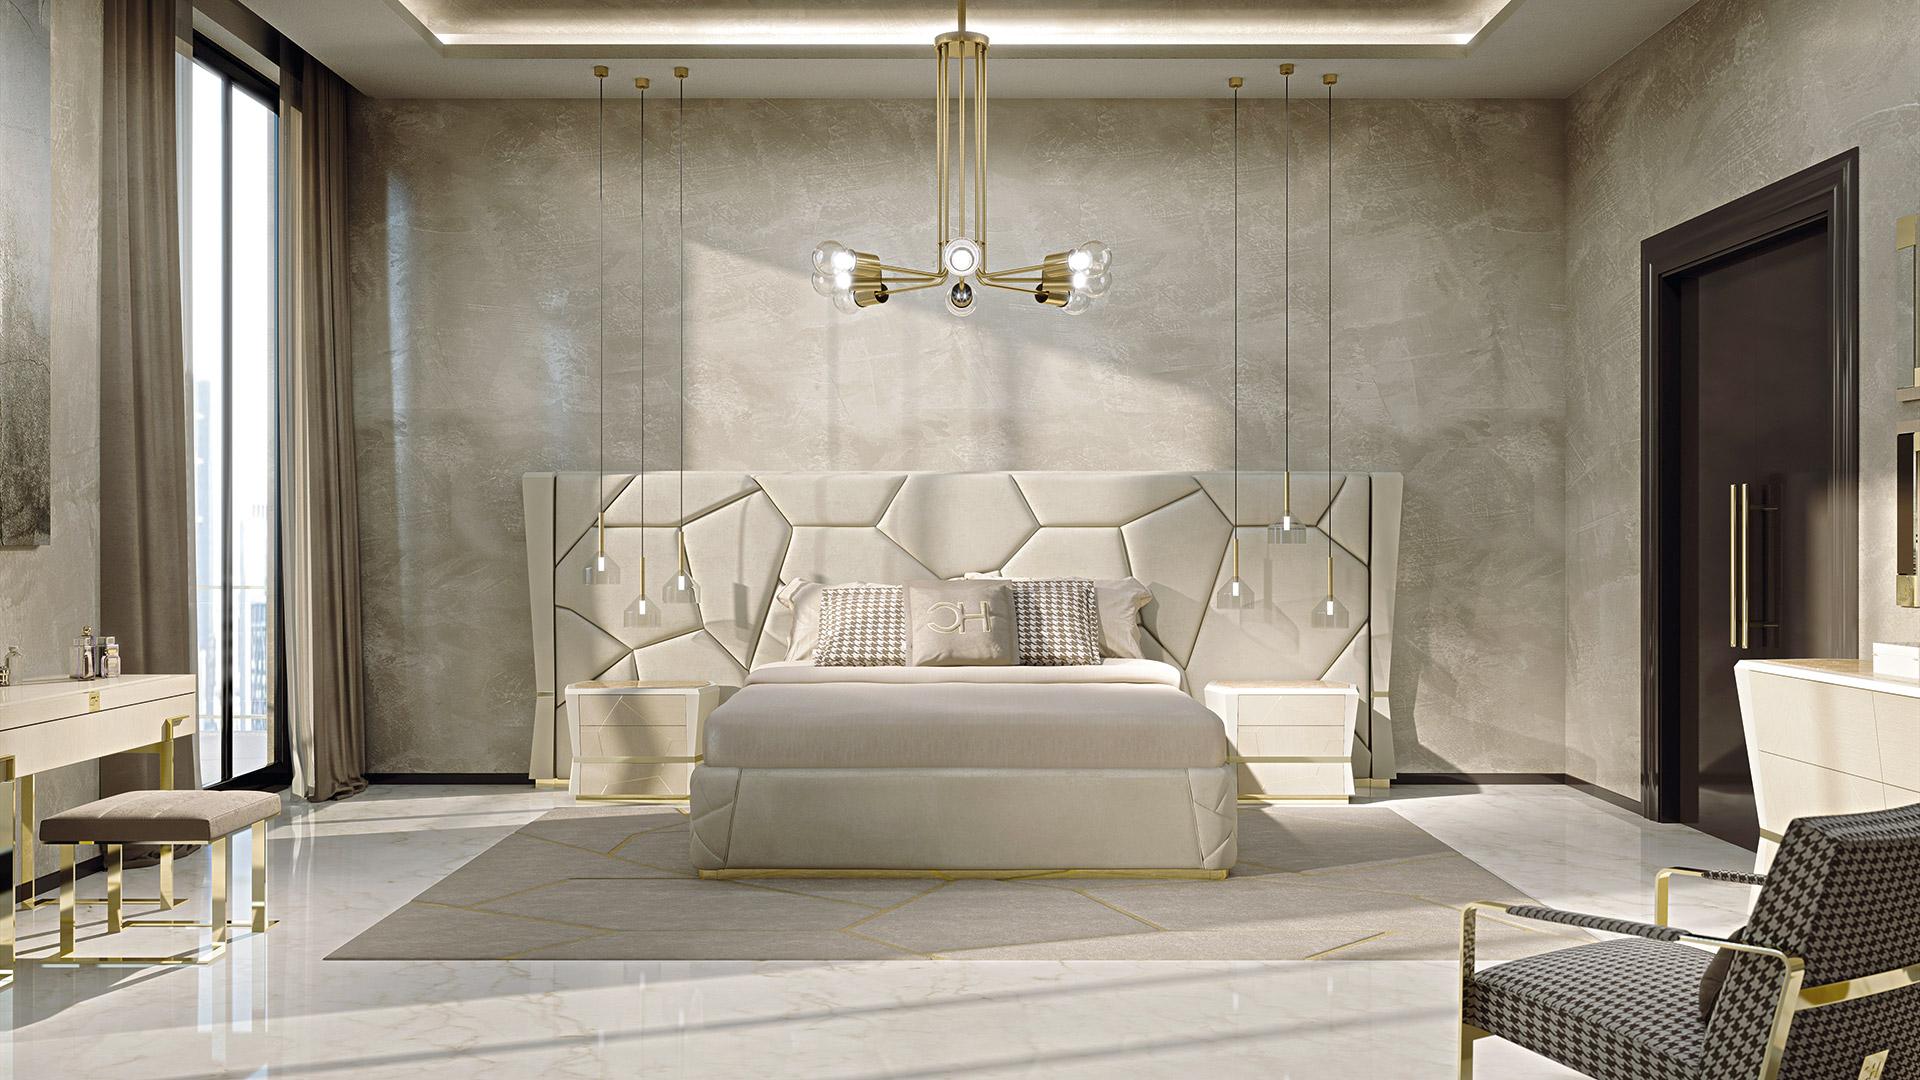 Padded bed. Mattress measures 180 x 200cm. Characterized by beautiful wooden diamond shaped columns on the sides with a central Golden galvanic metal strip. The headboard is completed by amazing irregular stitchings that resembles the entire